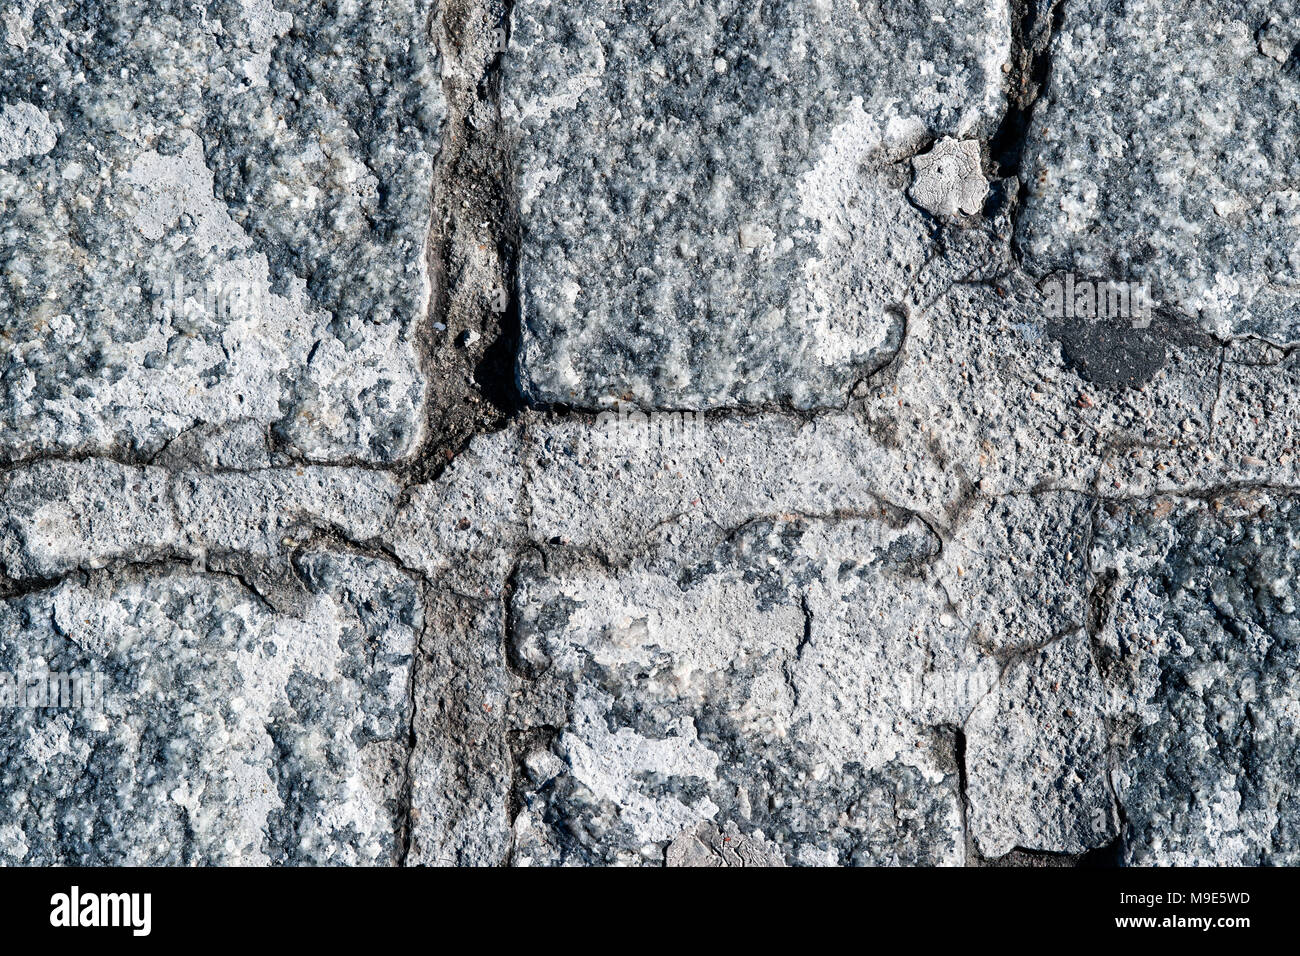 Texture of a hard rock stone paving blocks of grey and blue colors. Grunge rough surface Stock Photo